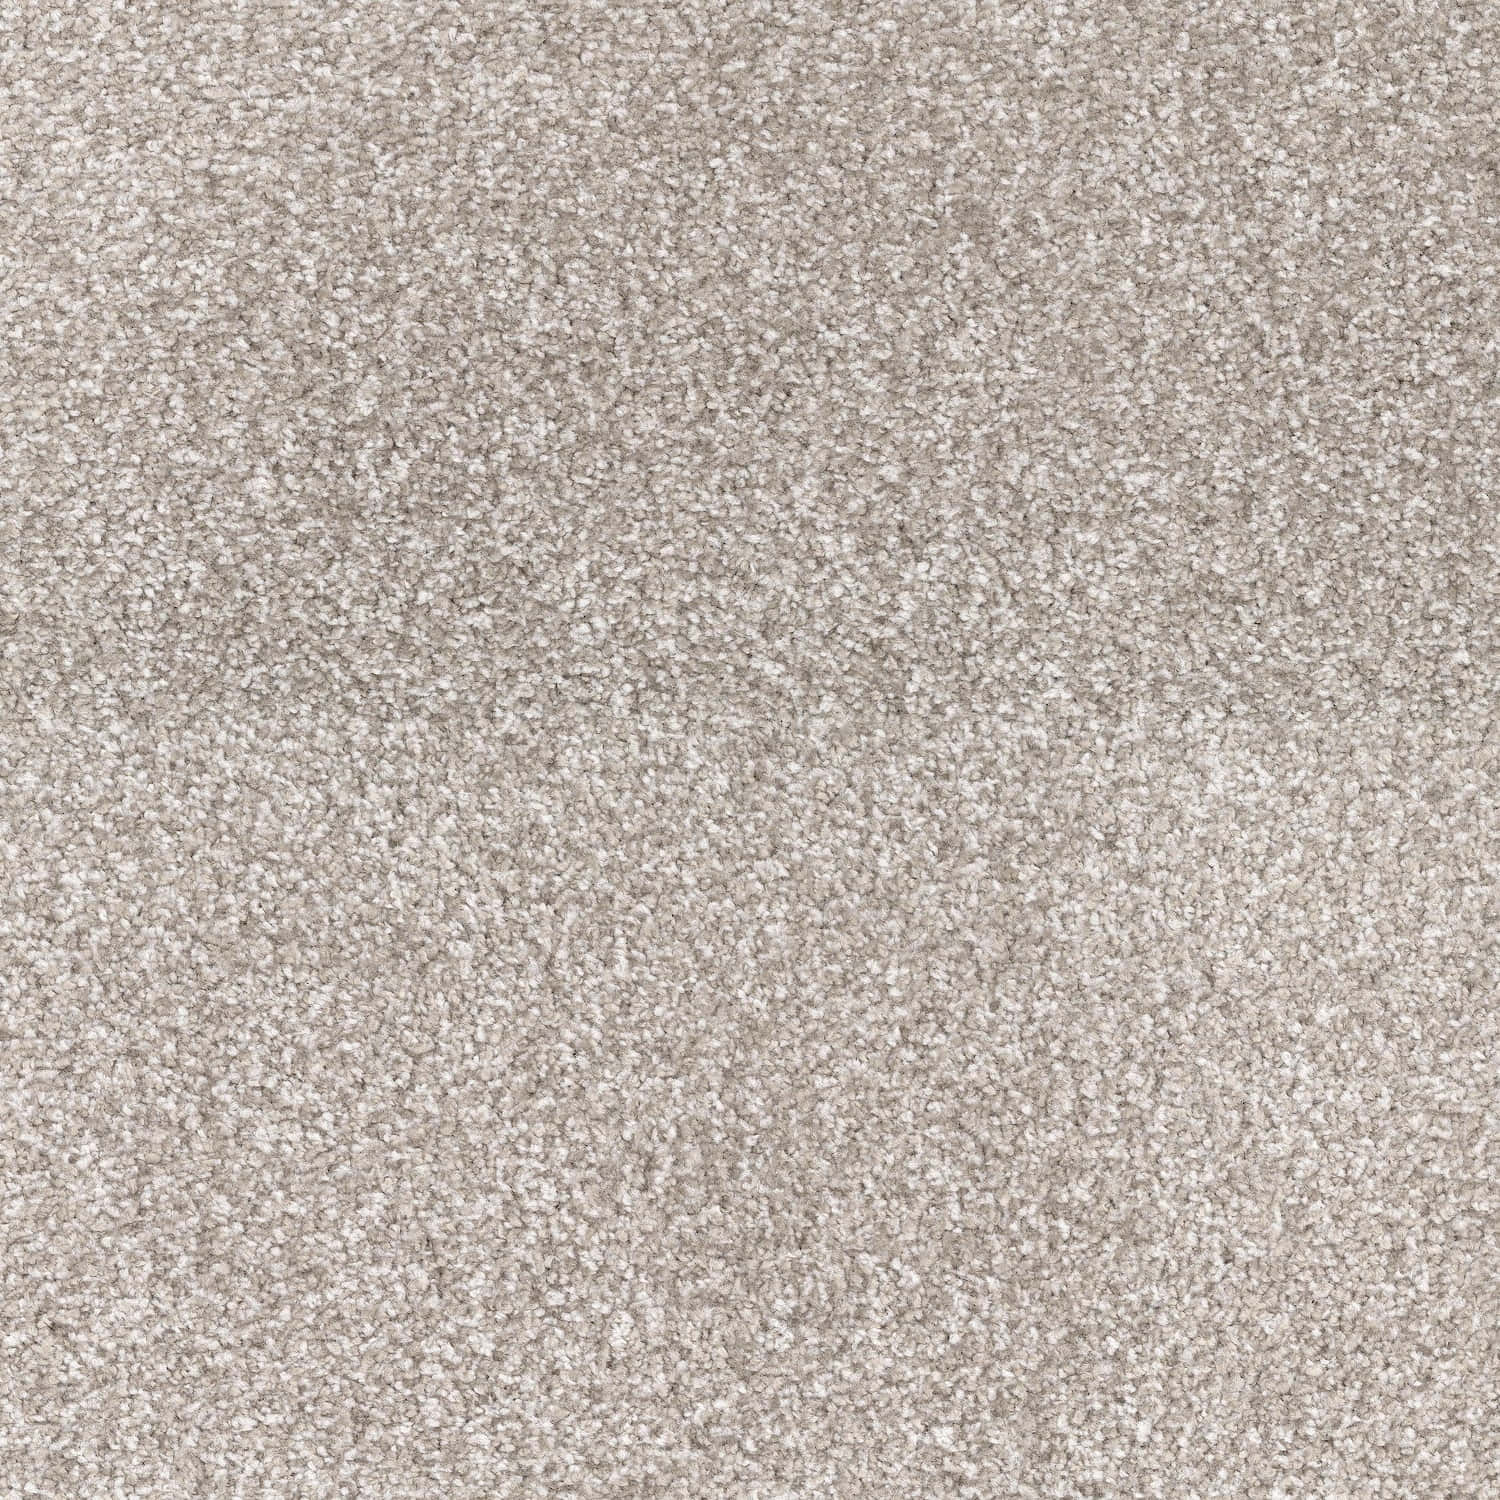 Soft and Inviting Carpet Texture